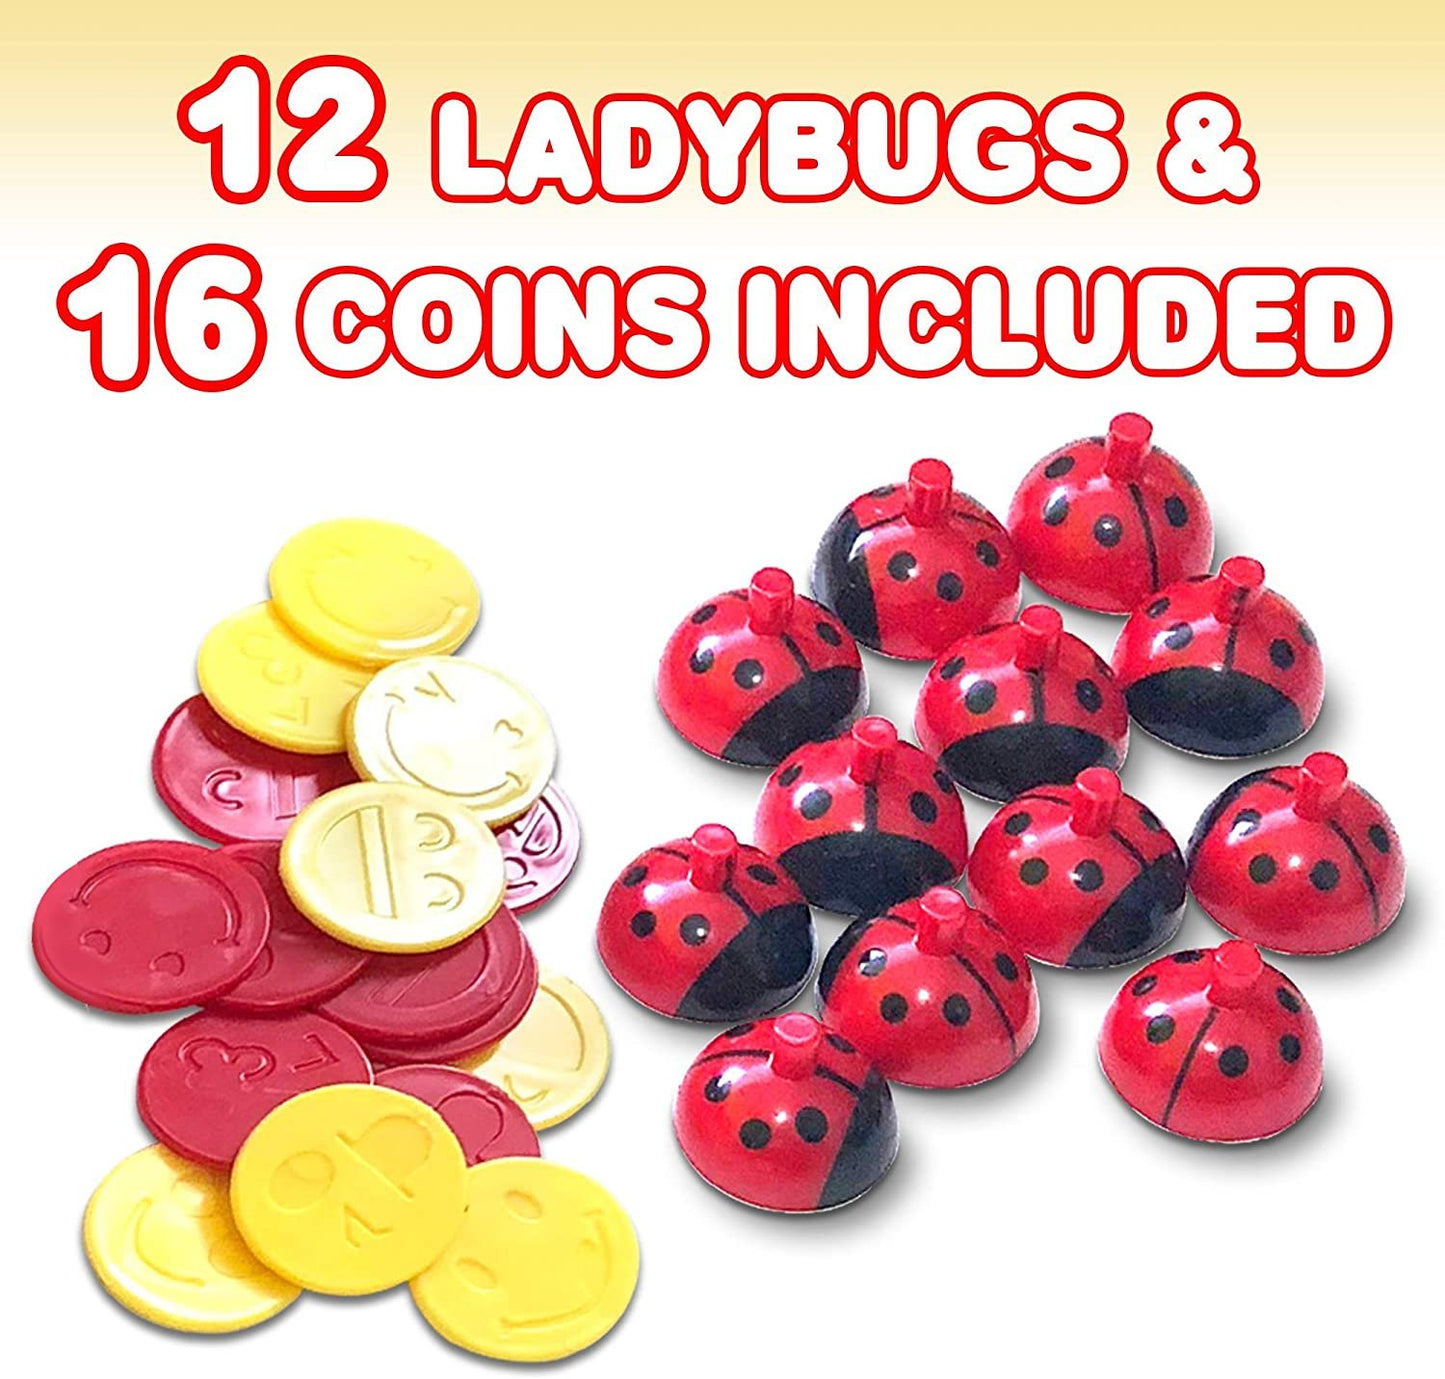 Gamie Ladybug Memory Matching Game for Kids - Fun Educational Learning Toy with 8 Match Games - Teaches Memory, Alphabets, Numbers, Colors and More - for Boys, Girls, Preschoolers